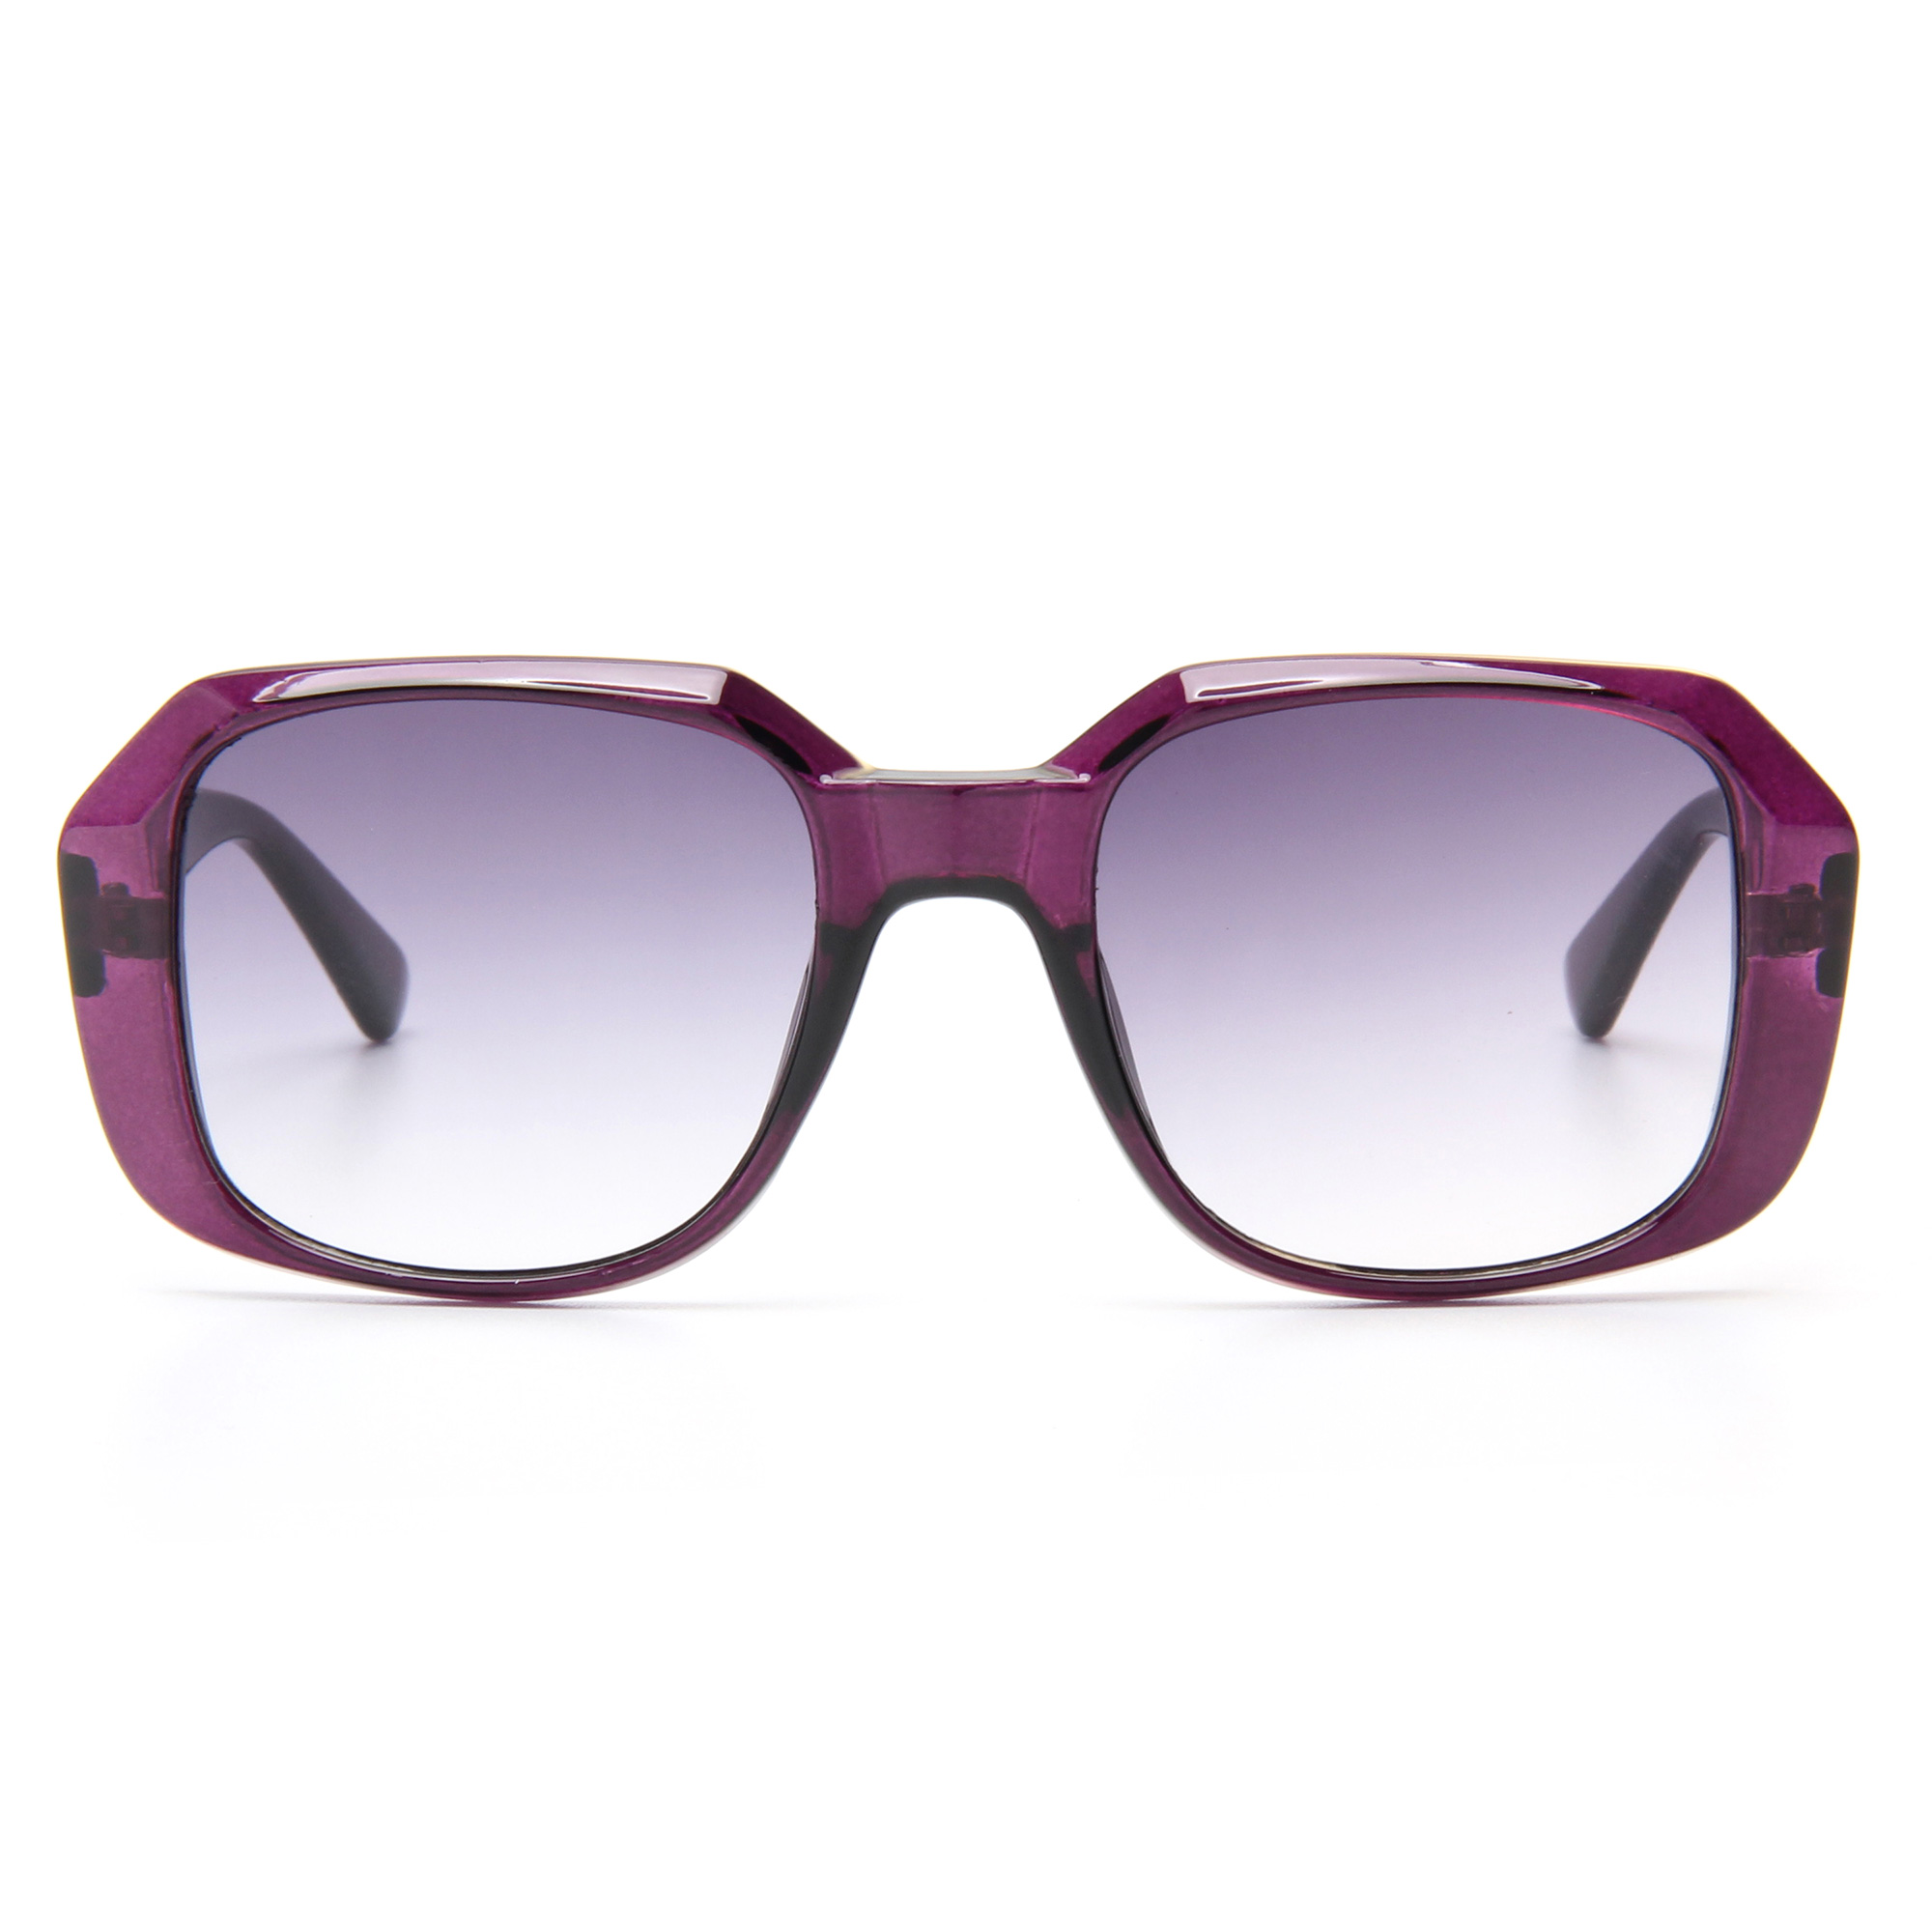 Eugenia classic for Eye Protection-2